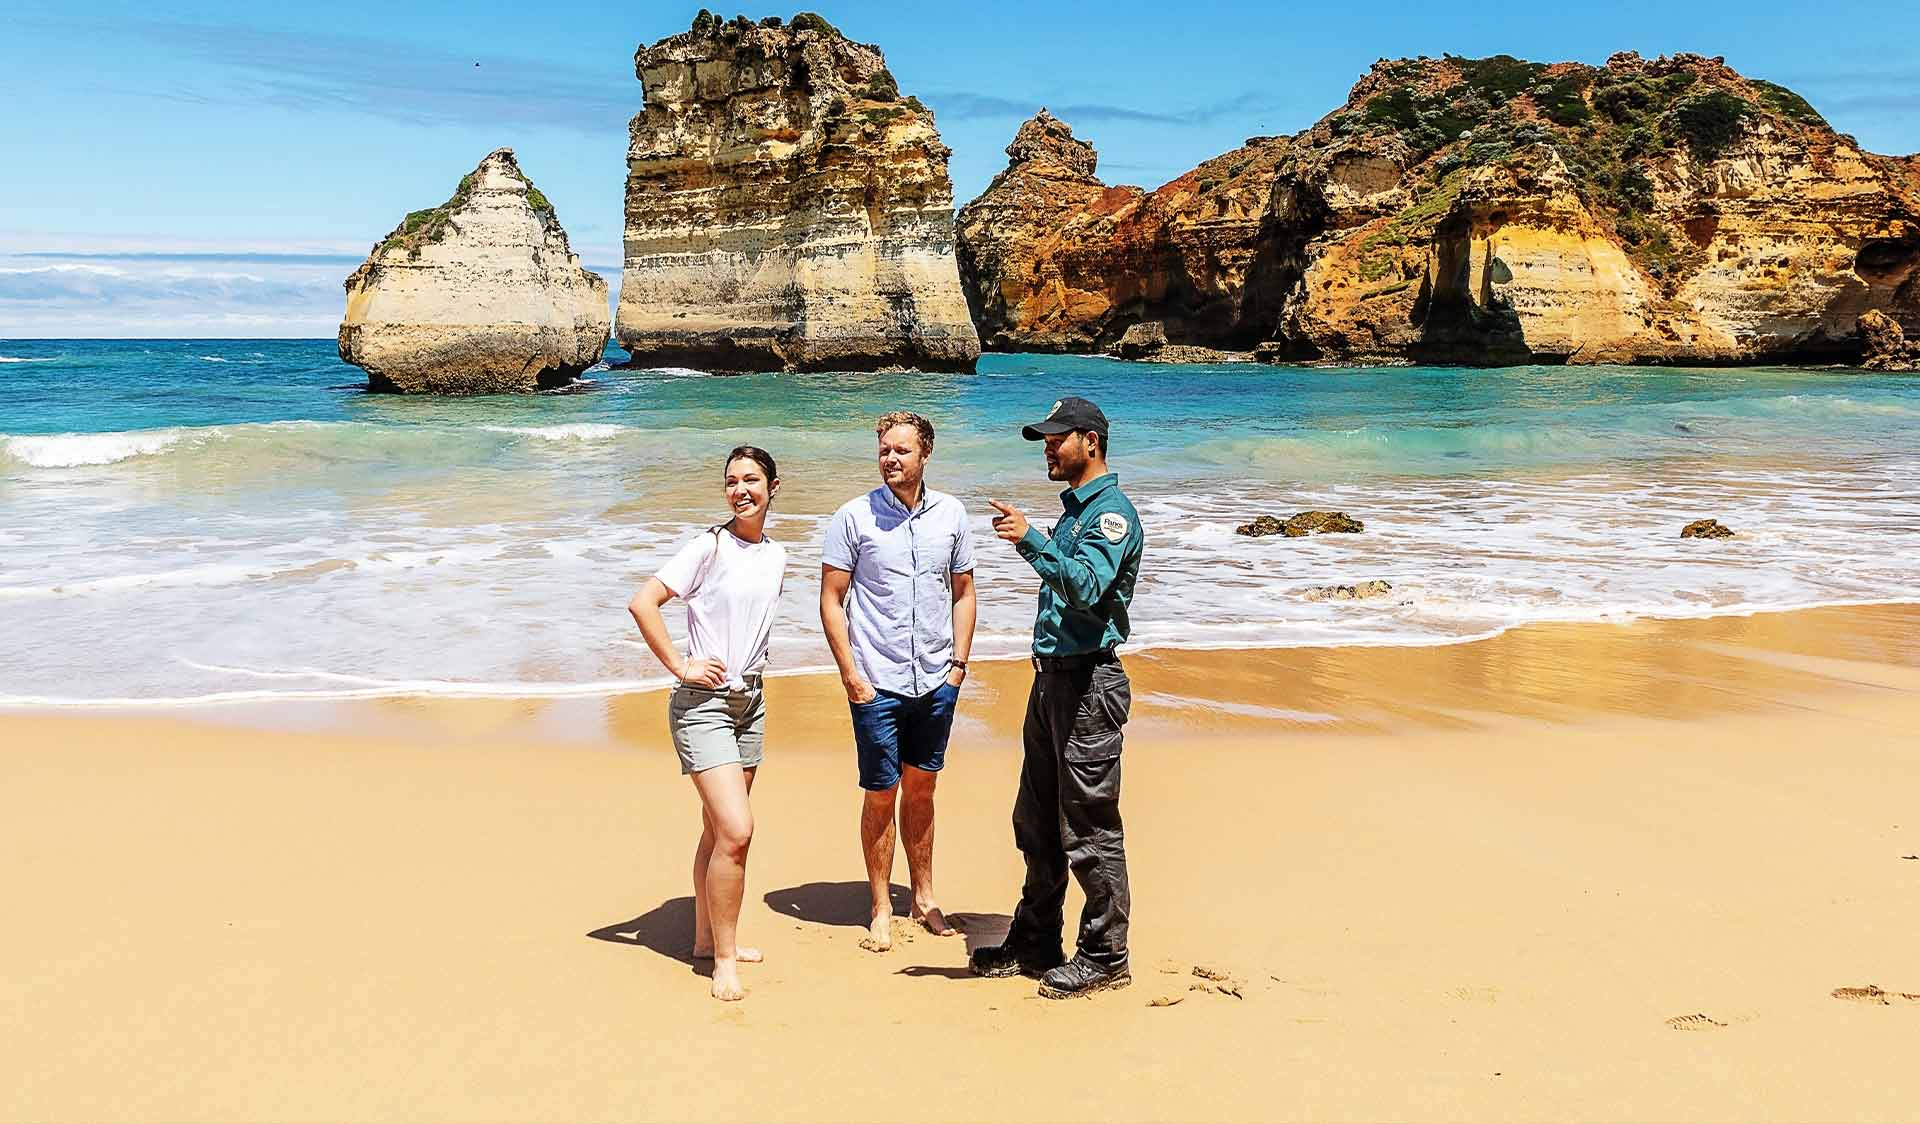 A ranger talks to two visitors on the beach at Port Campbell National Park